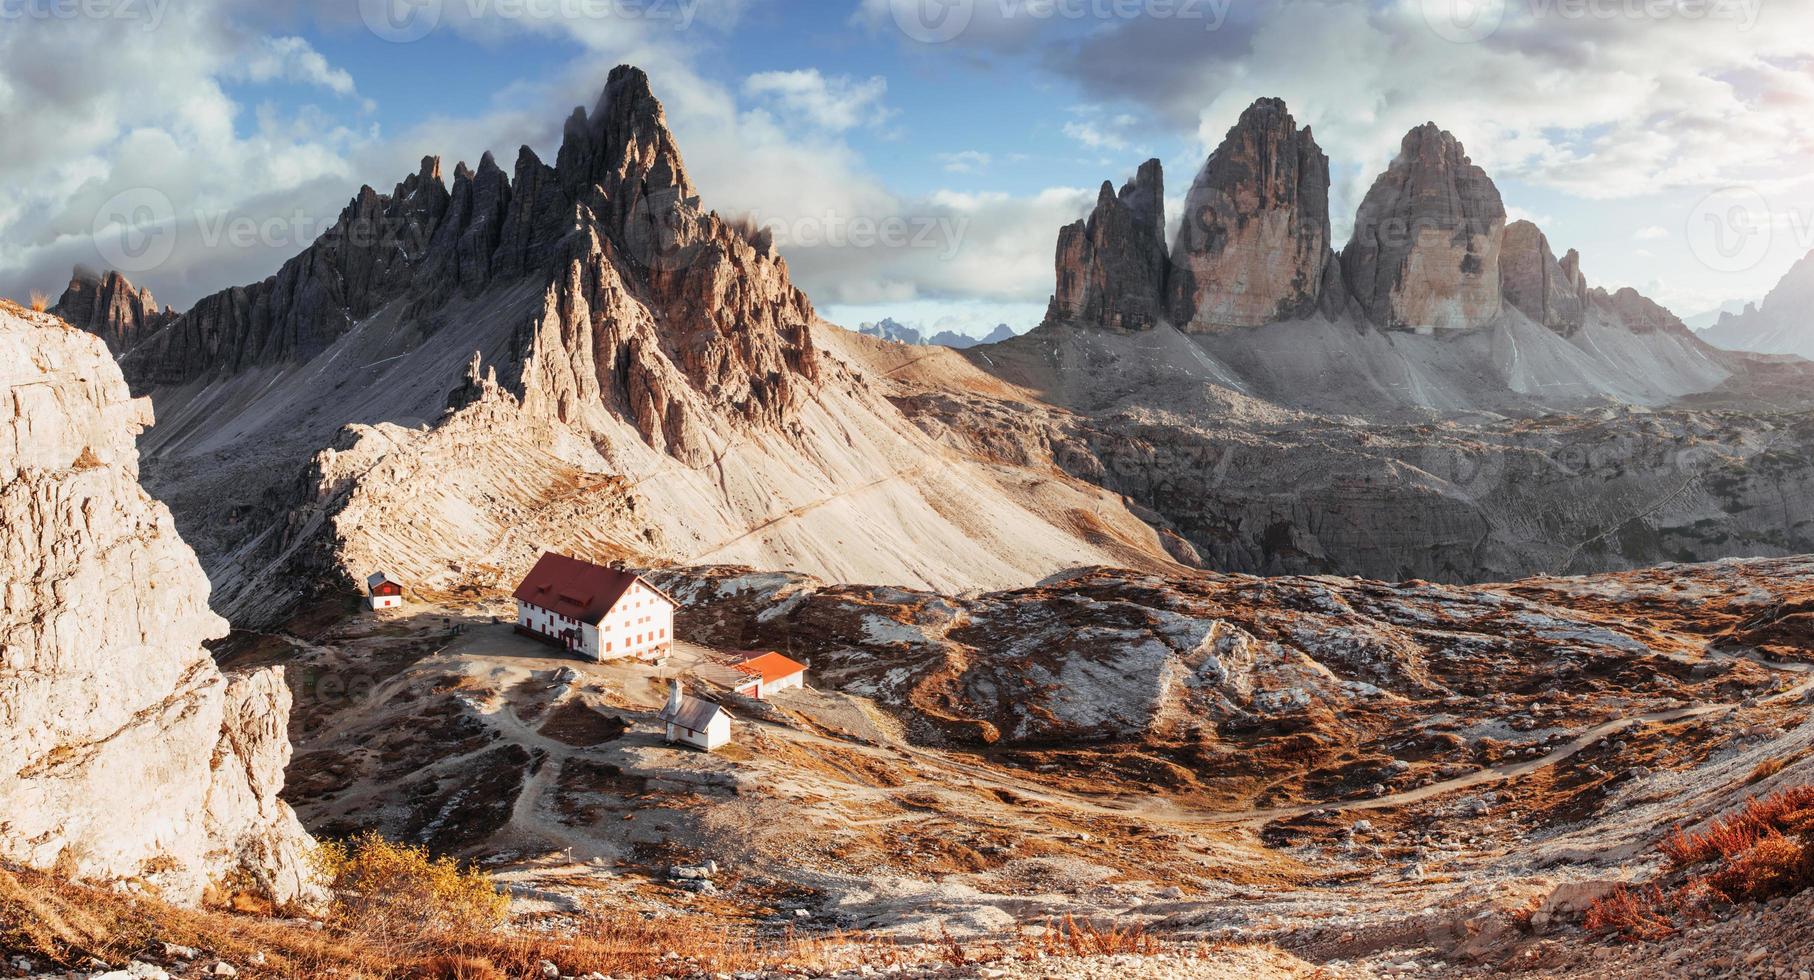 Little plants on the rocks. Outstanding landscape of the majestic Seceda dolomite mountains at daytime. Panoramic photo